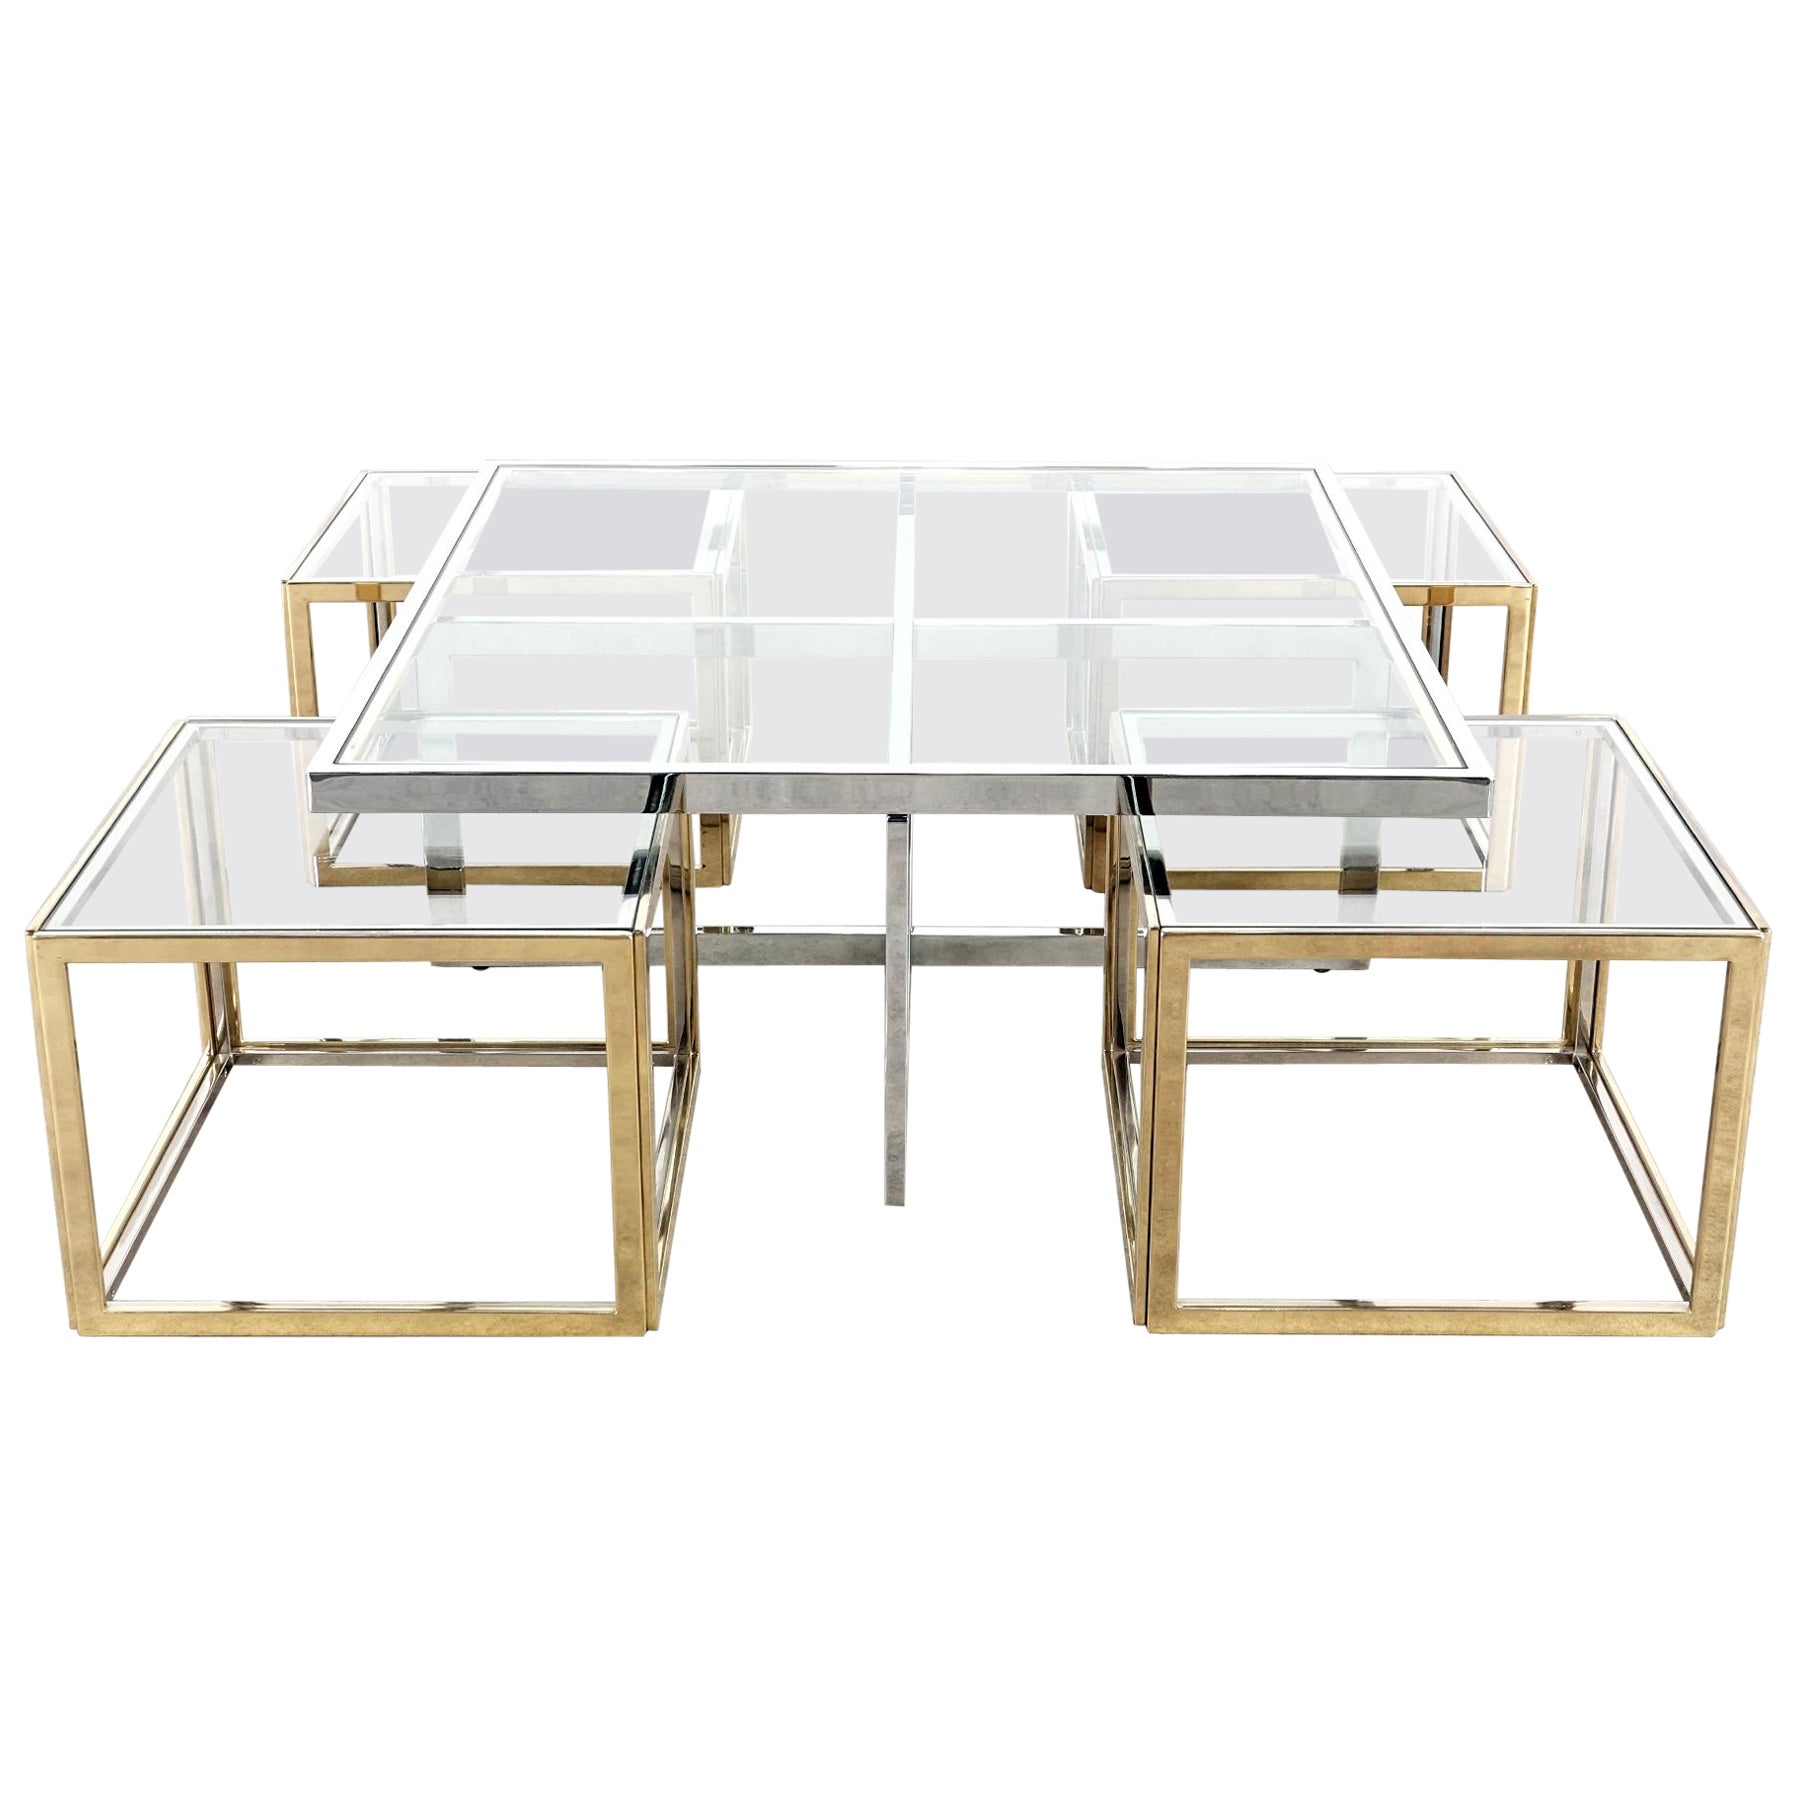 Maison Charles Chrome & Brass Bicolor Coffee Table with Nesting Tables, 1970s